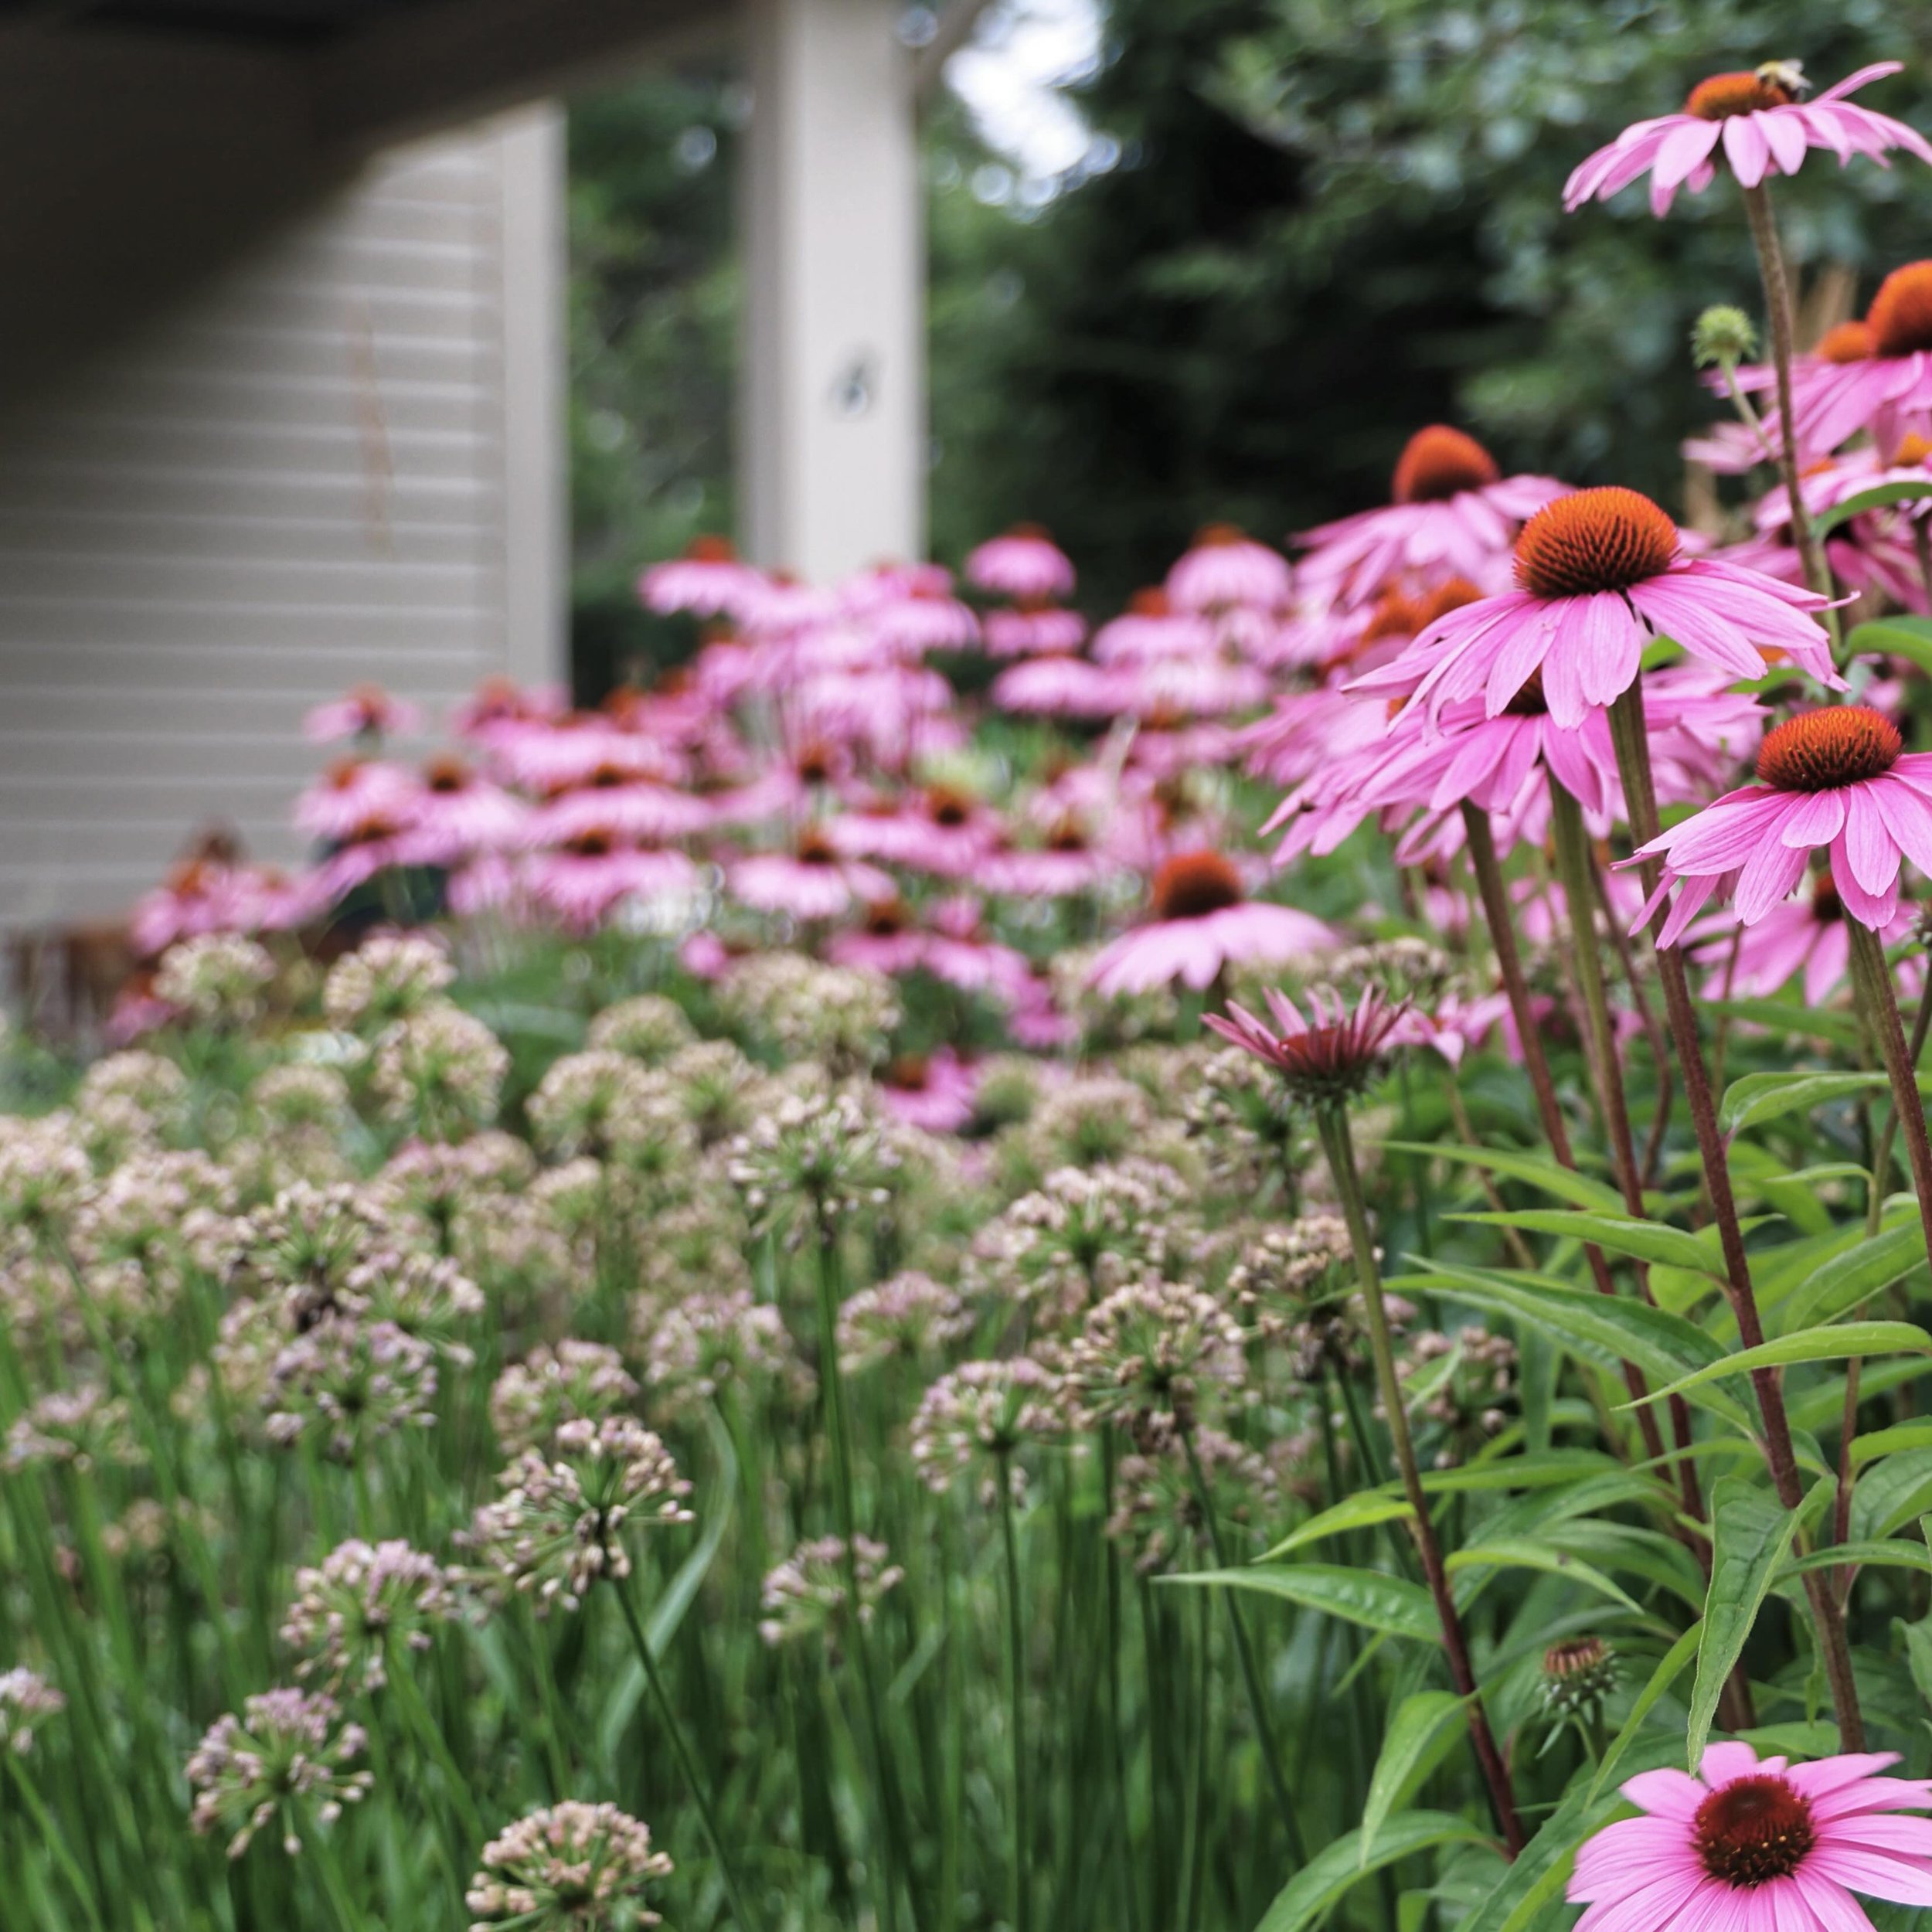 Allium seed heads holding their own against peak Coneflower. 

Dog days of summer, in a picture. 

#landscapedesign #gardens #ecologicaldesign #newengland #allium #echinacea #homedesign